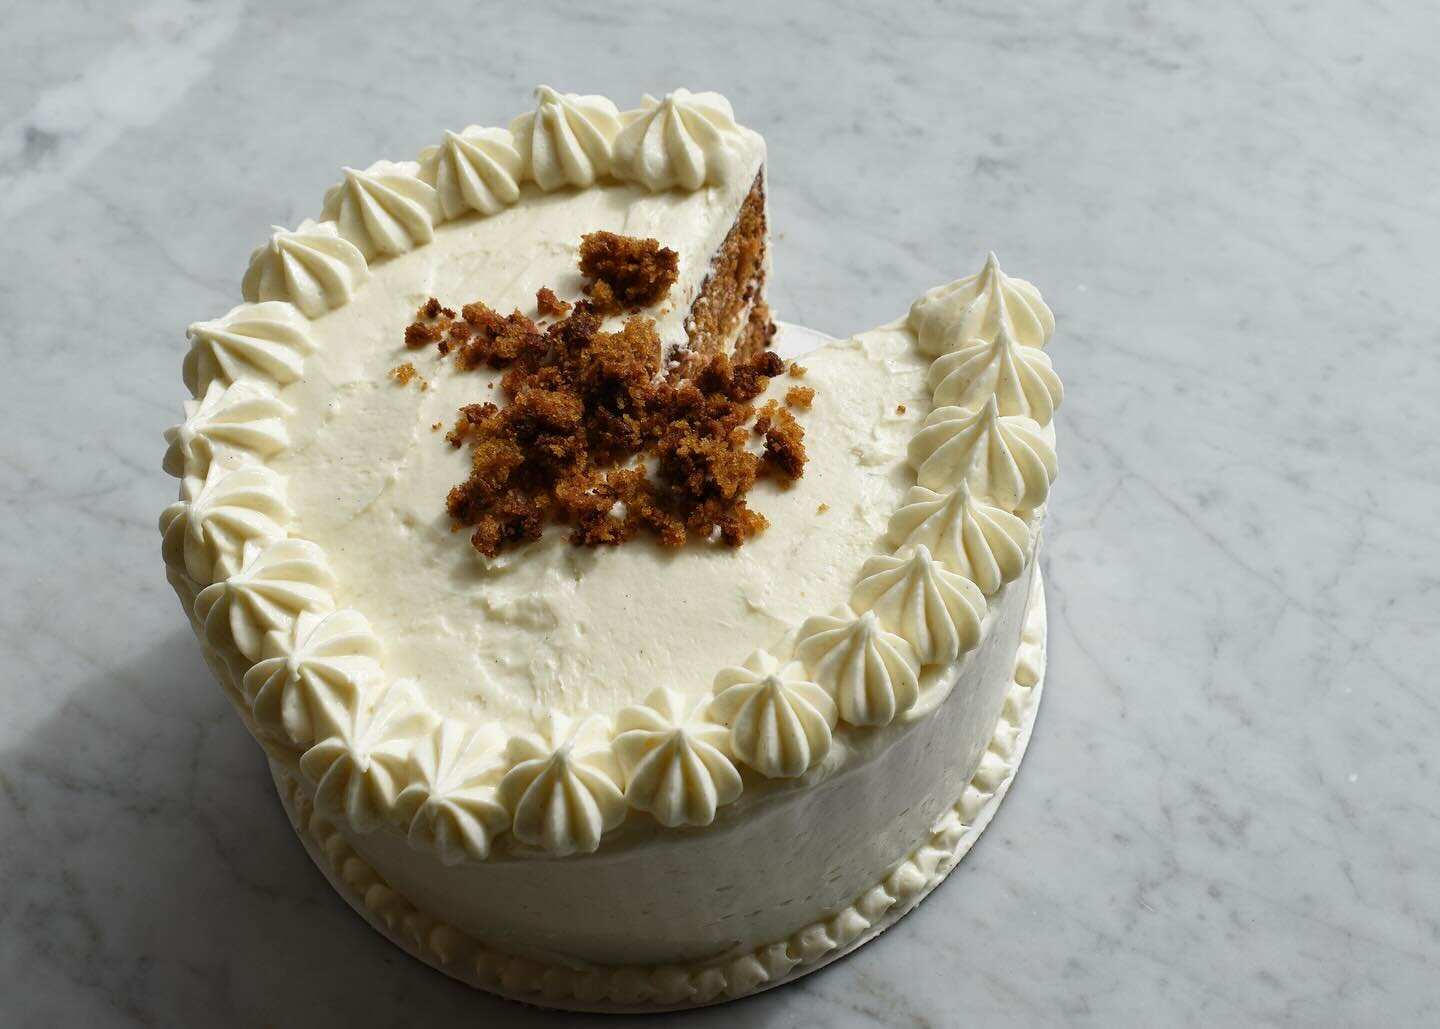 Carrot cake is back! Grab a slice at Fairmount or our Van Aken location. 
Our carrot cake is filled with golden raisins, candied ginger, and topped with a cream cheese frosting (*No Nuts!*)
 
Stop in and take a slice or place an order for a full cake